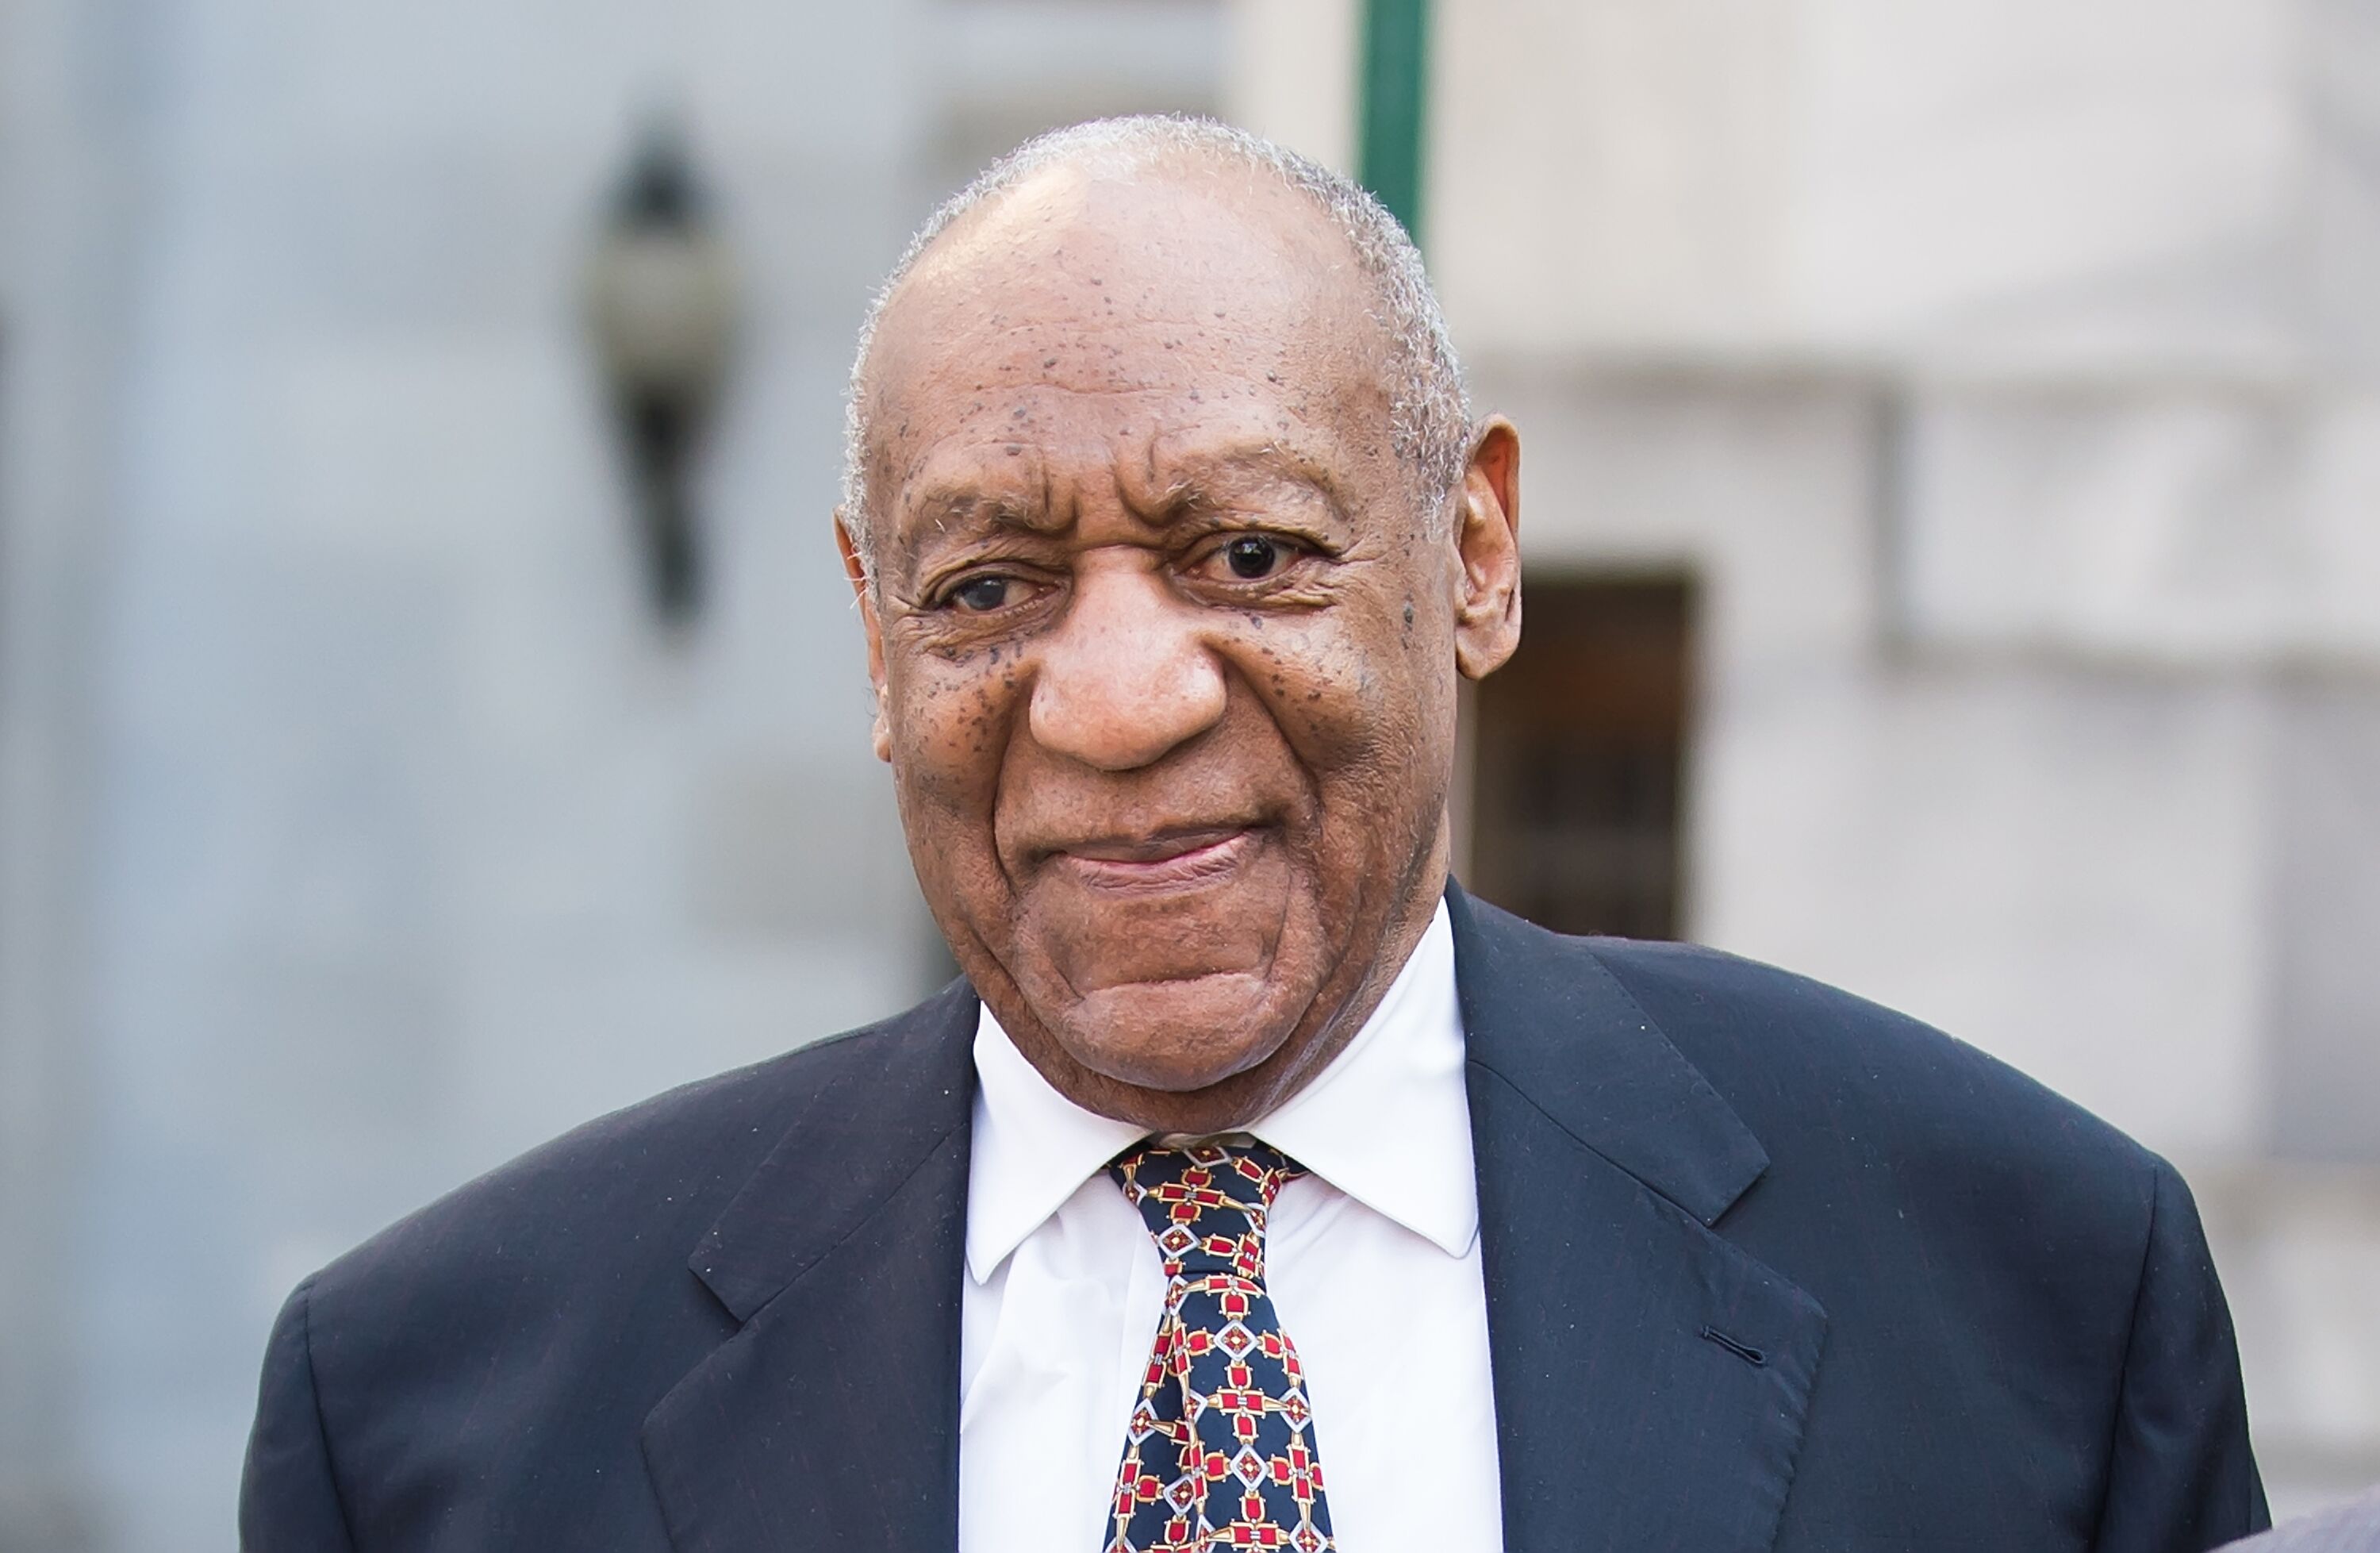 DIsgraced comedian Bill Cosby exiting the courtroom during the Andrea Constand trial/ Source: Getty Images